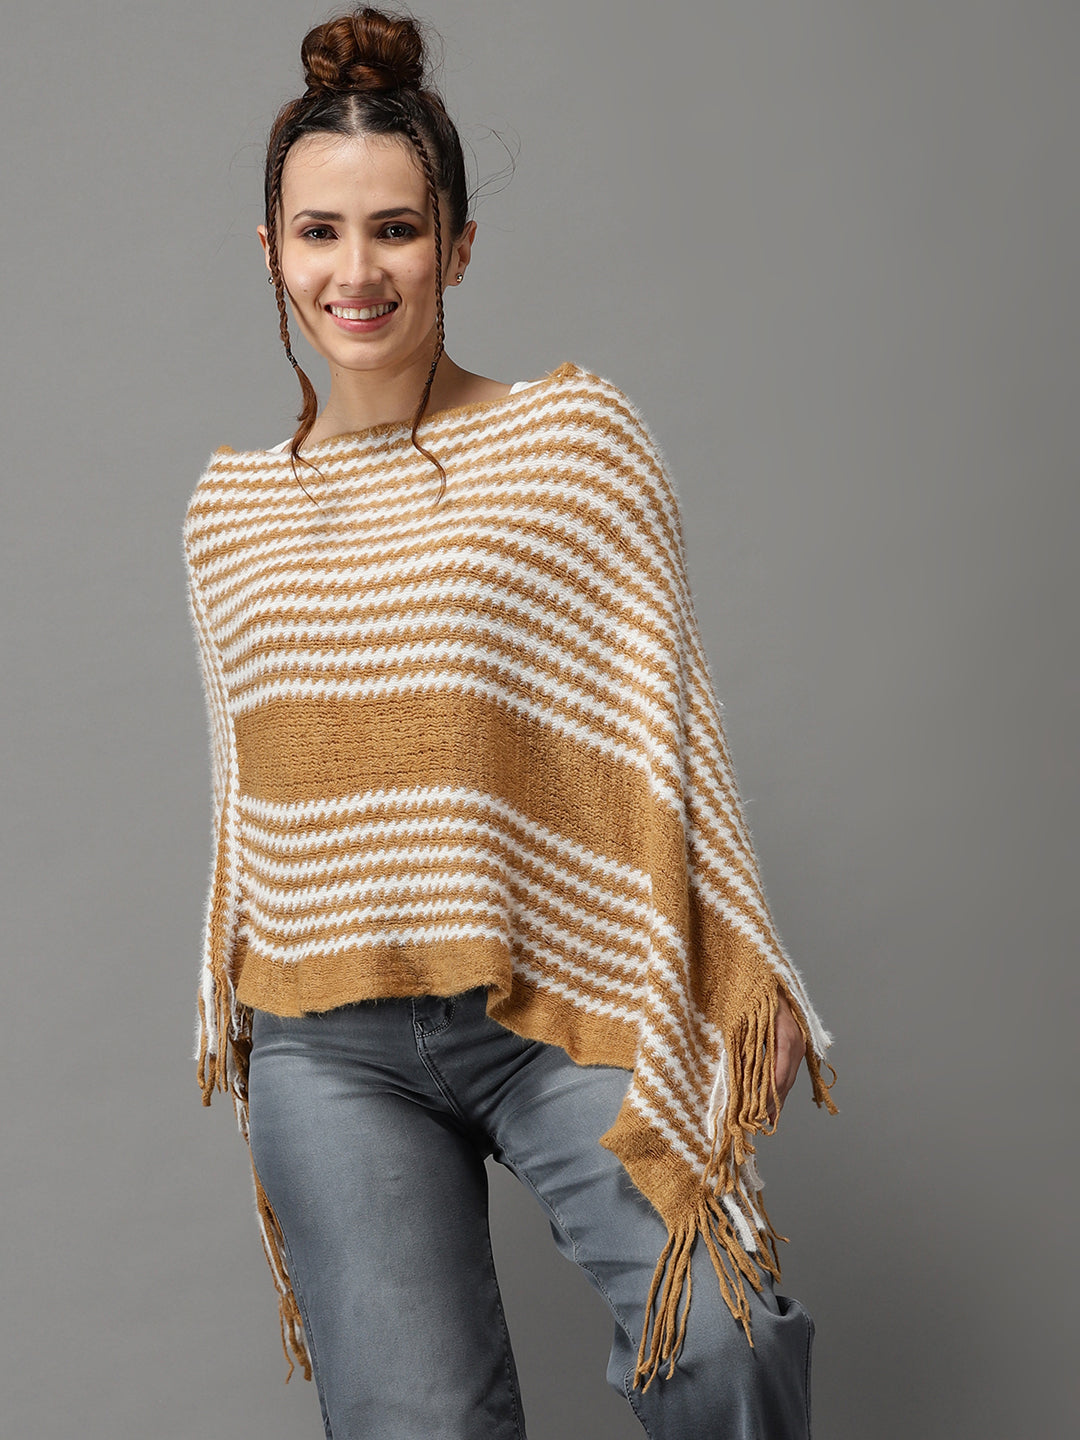 Women's Camel Brown Striped Poncho Sweater